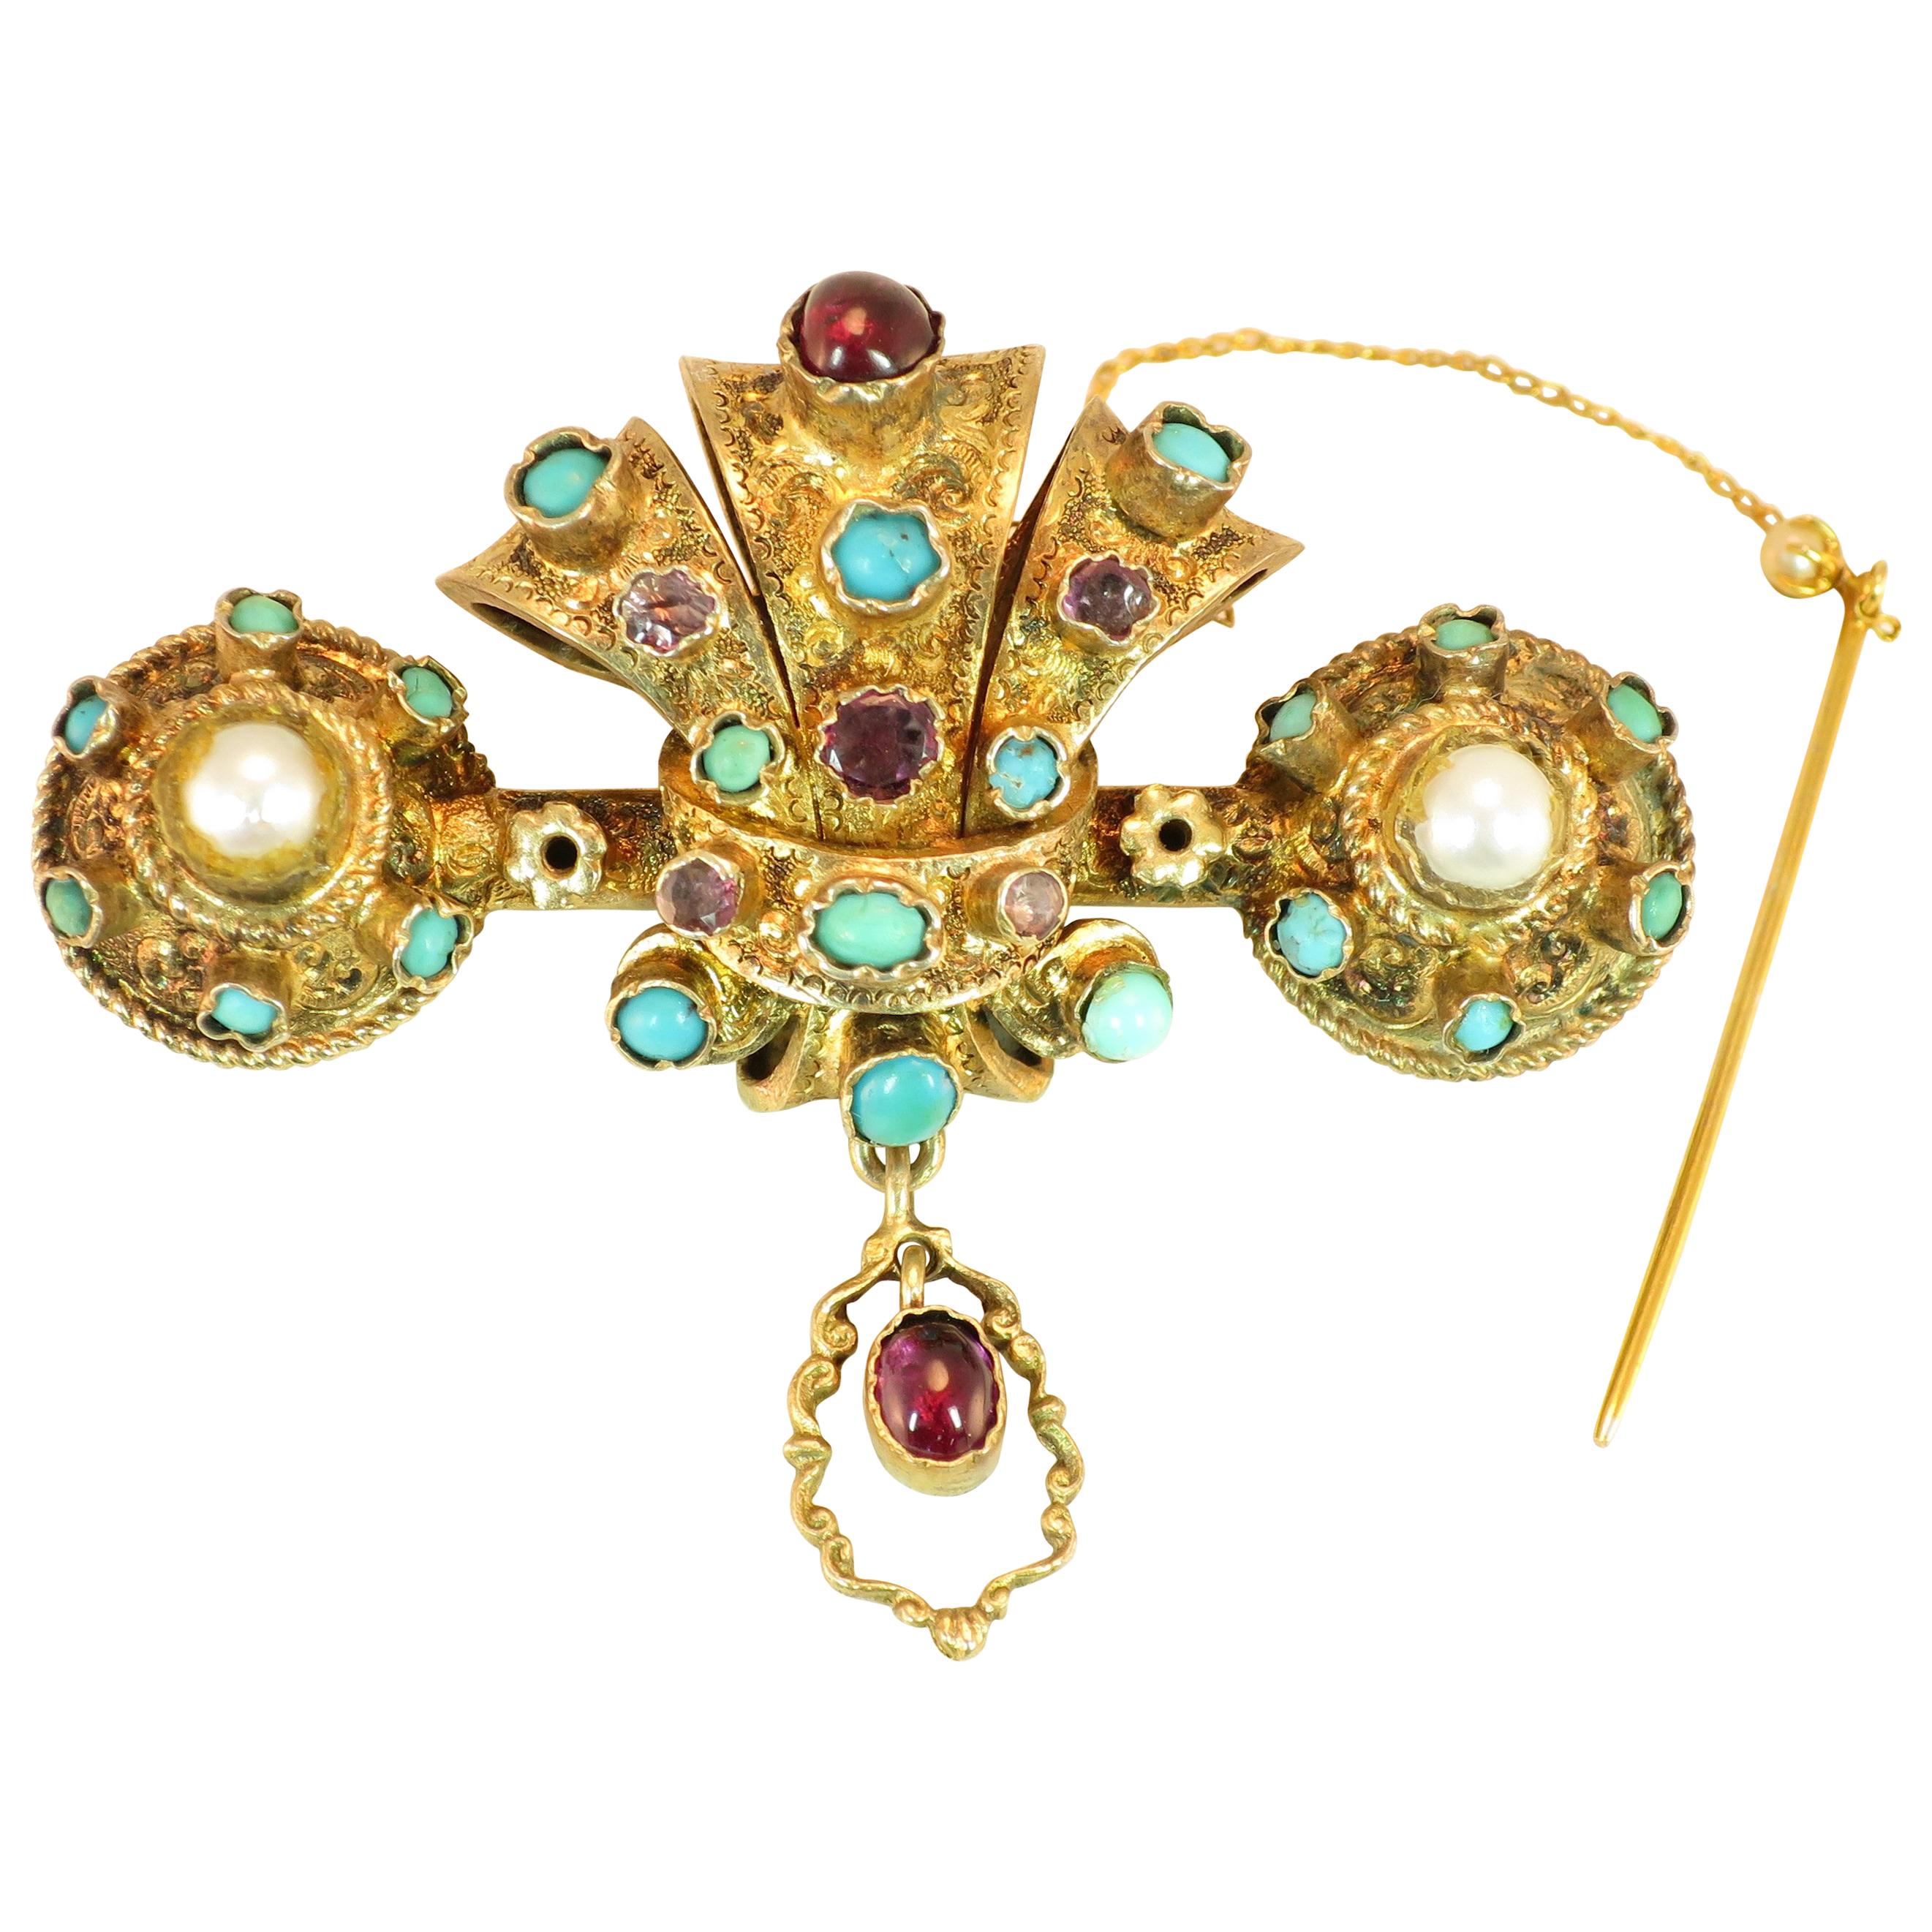 Georgian Baroque Brooch 10k Gold Amethyst Turquoise Pearls Circa 1840 For Sale